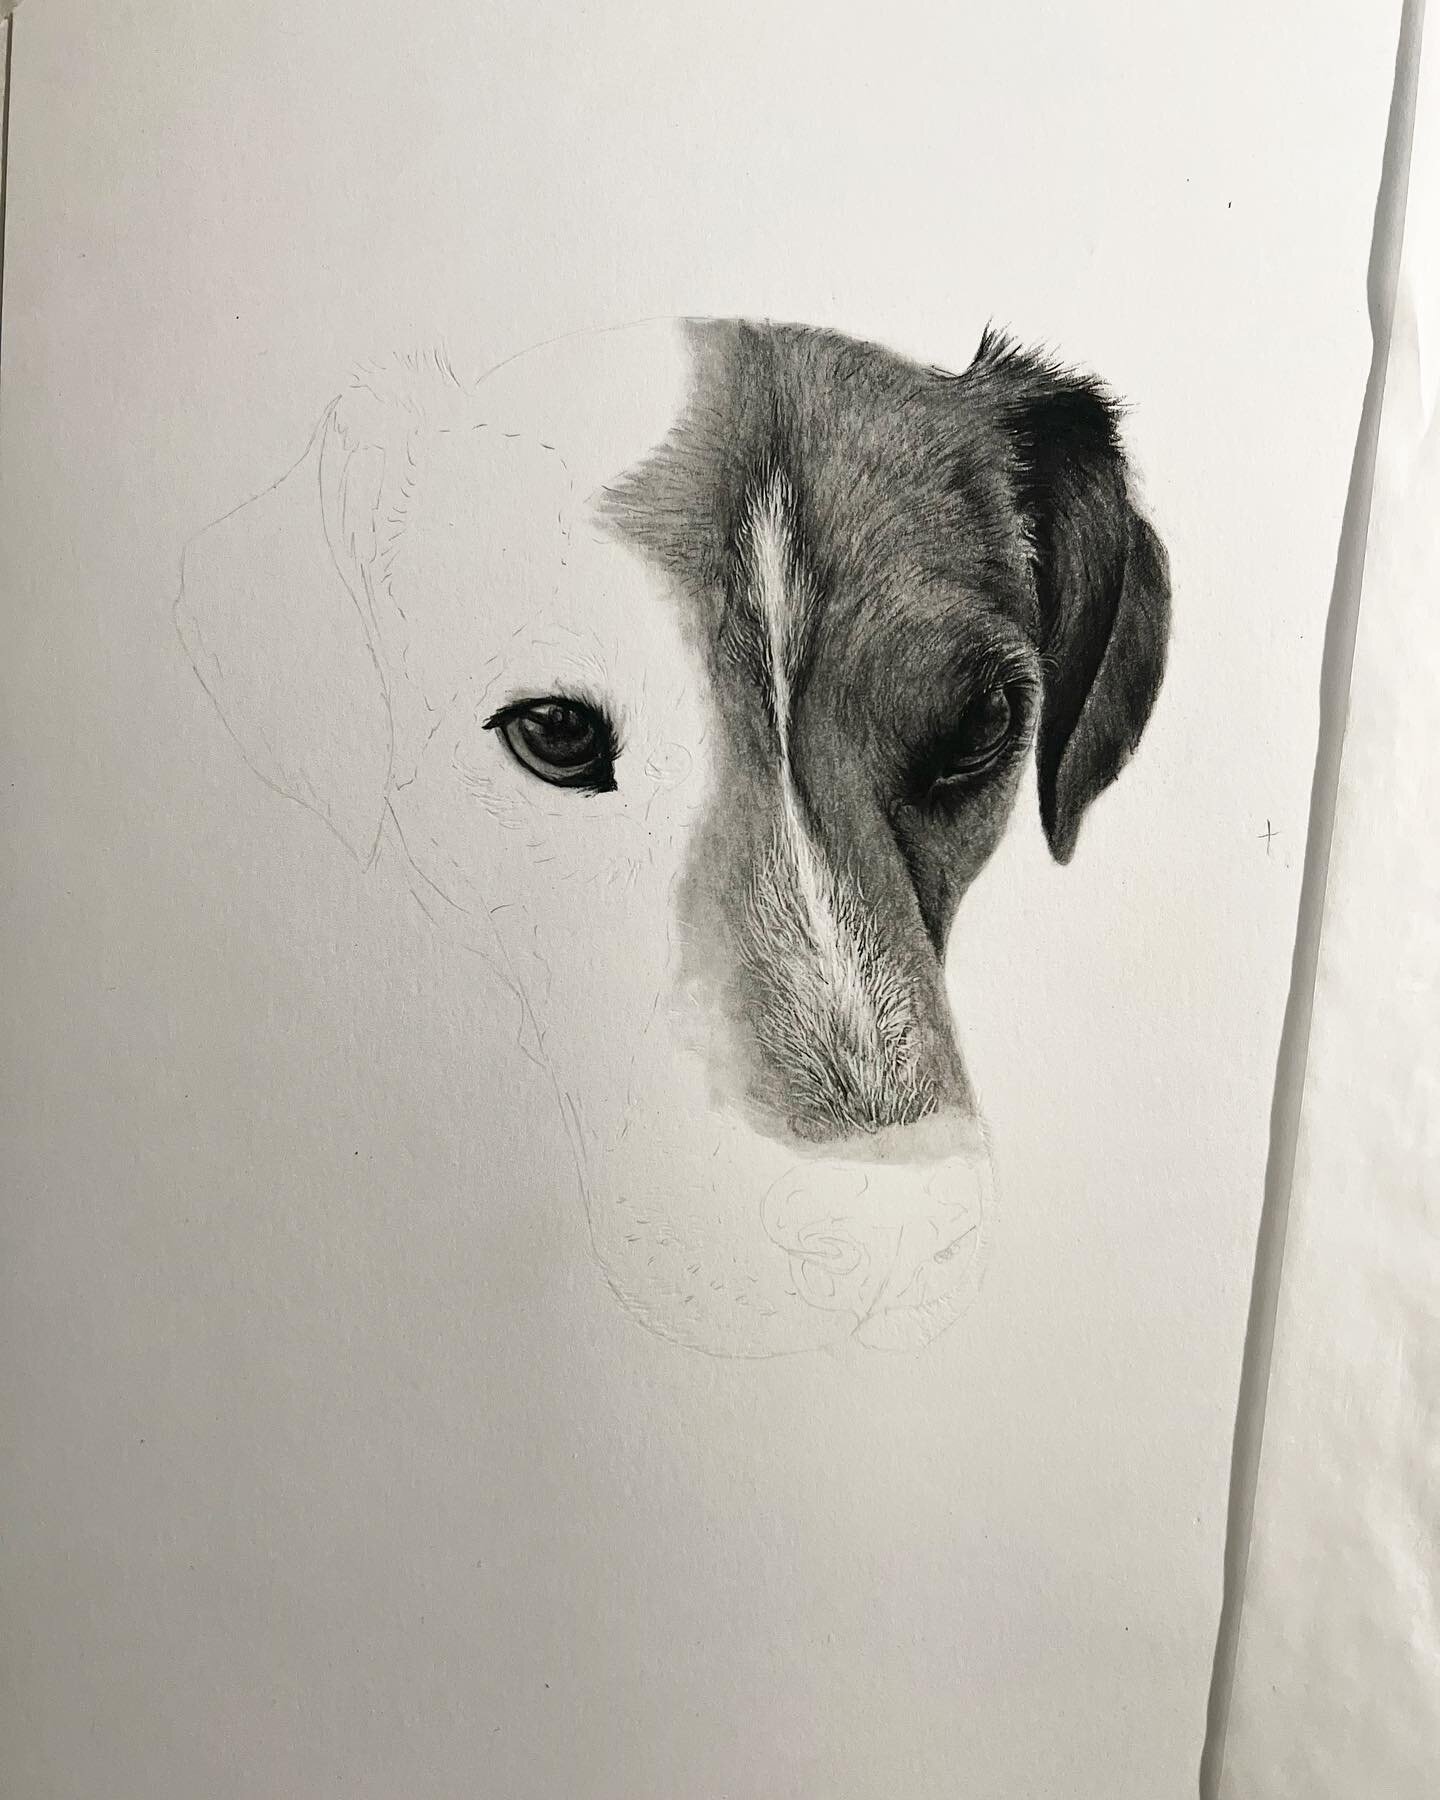 @suj.chainzzz 1 of 2 Pups loading&hellip;.
.
.
My books are OPEN for the holiday season! I am now taking commissions for WILDLIFE, PETS, and PEOPLE! Secure your spot before it&rsquo;s too late! I still have spots open for BEFORE CHRISTMAS DELIVERY!
.